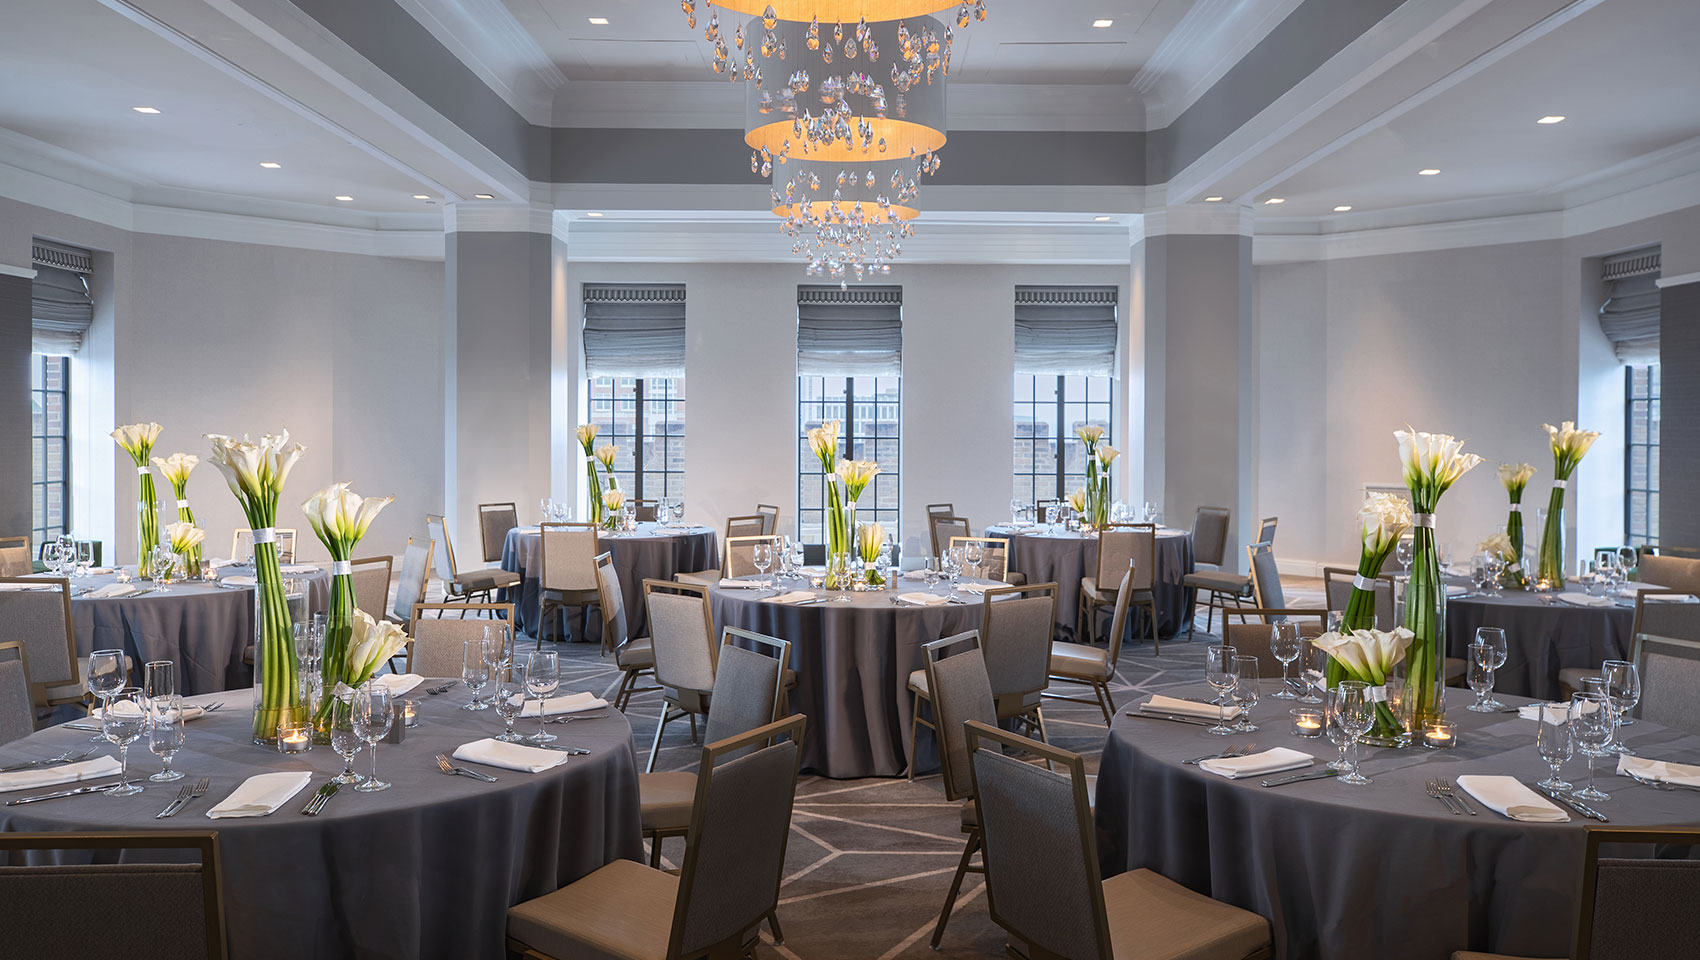 Kimpton Hotel Palomar Philadelphia ballroom set up for a social banquet with multiple round tables with floral arrangements placed in a sunlit room with surrounding windows overlooking views of the city